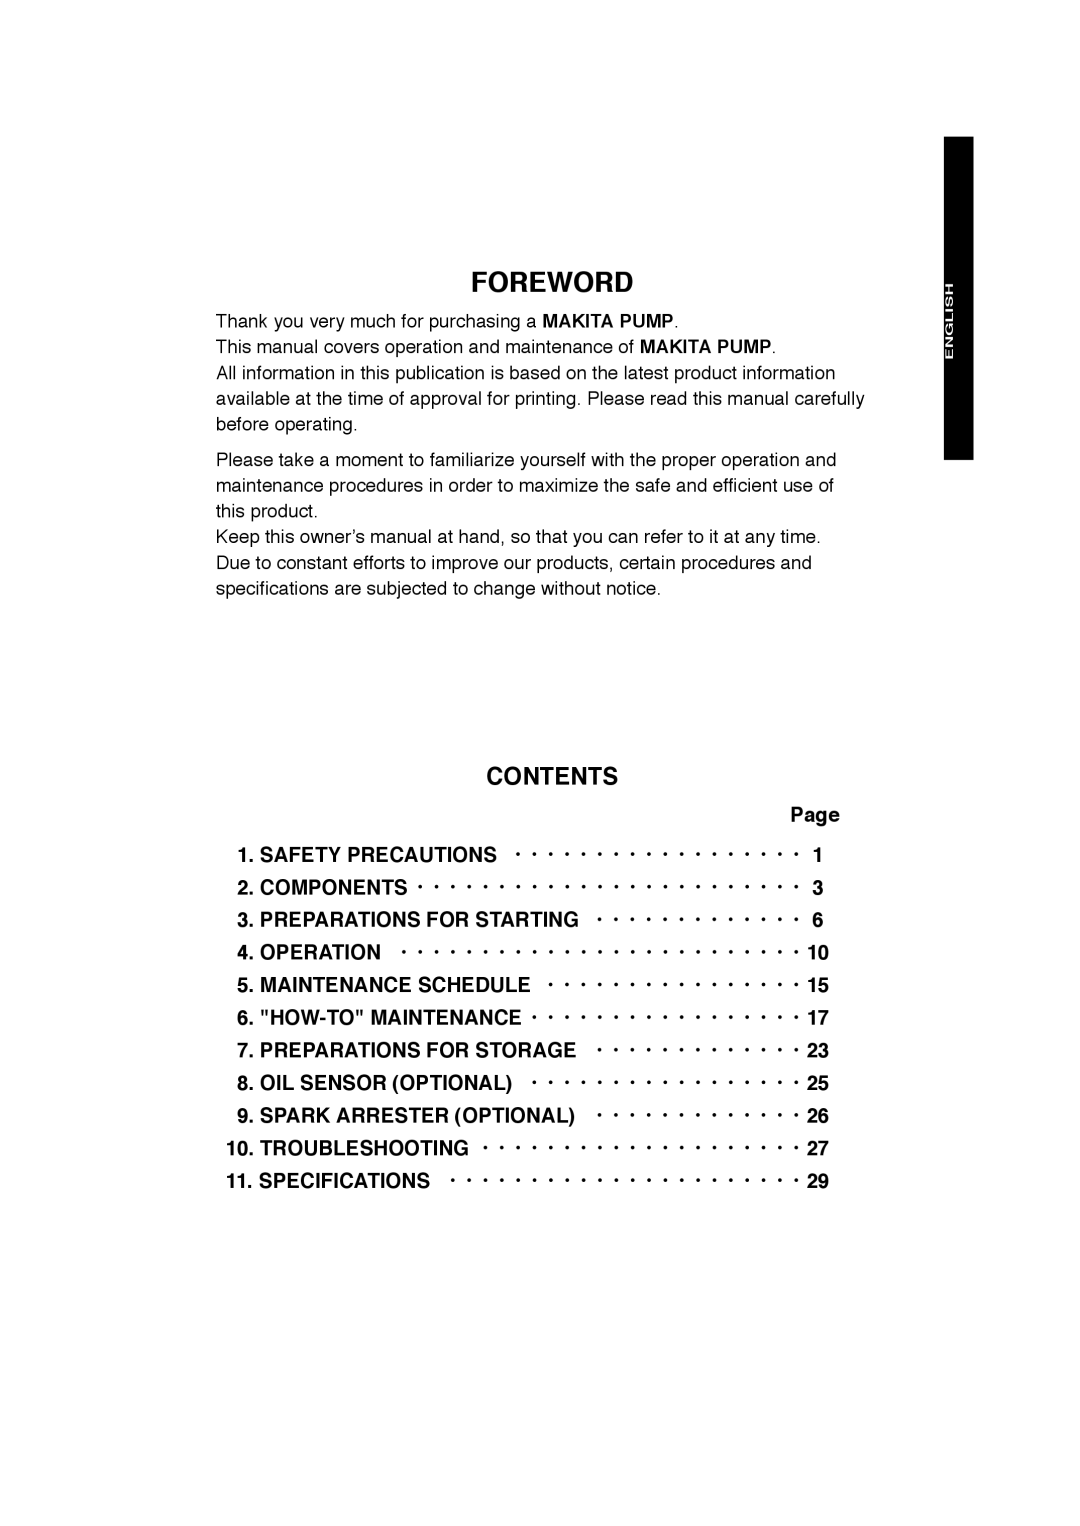 Makita EW120R Foreword, Contents, Page 1.SAFETY PRECAUTIONS ・・・・・・・・・・・・・・・・・・, Components ・・・・・・・・・・・・・・・・・・・・・・・・ 